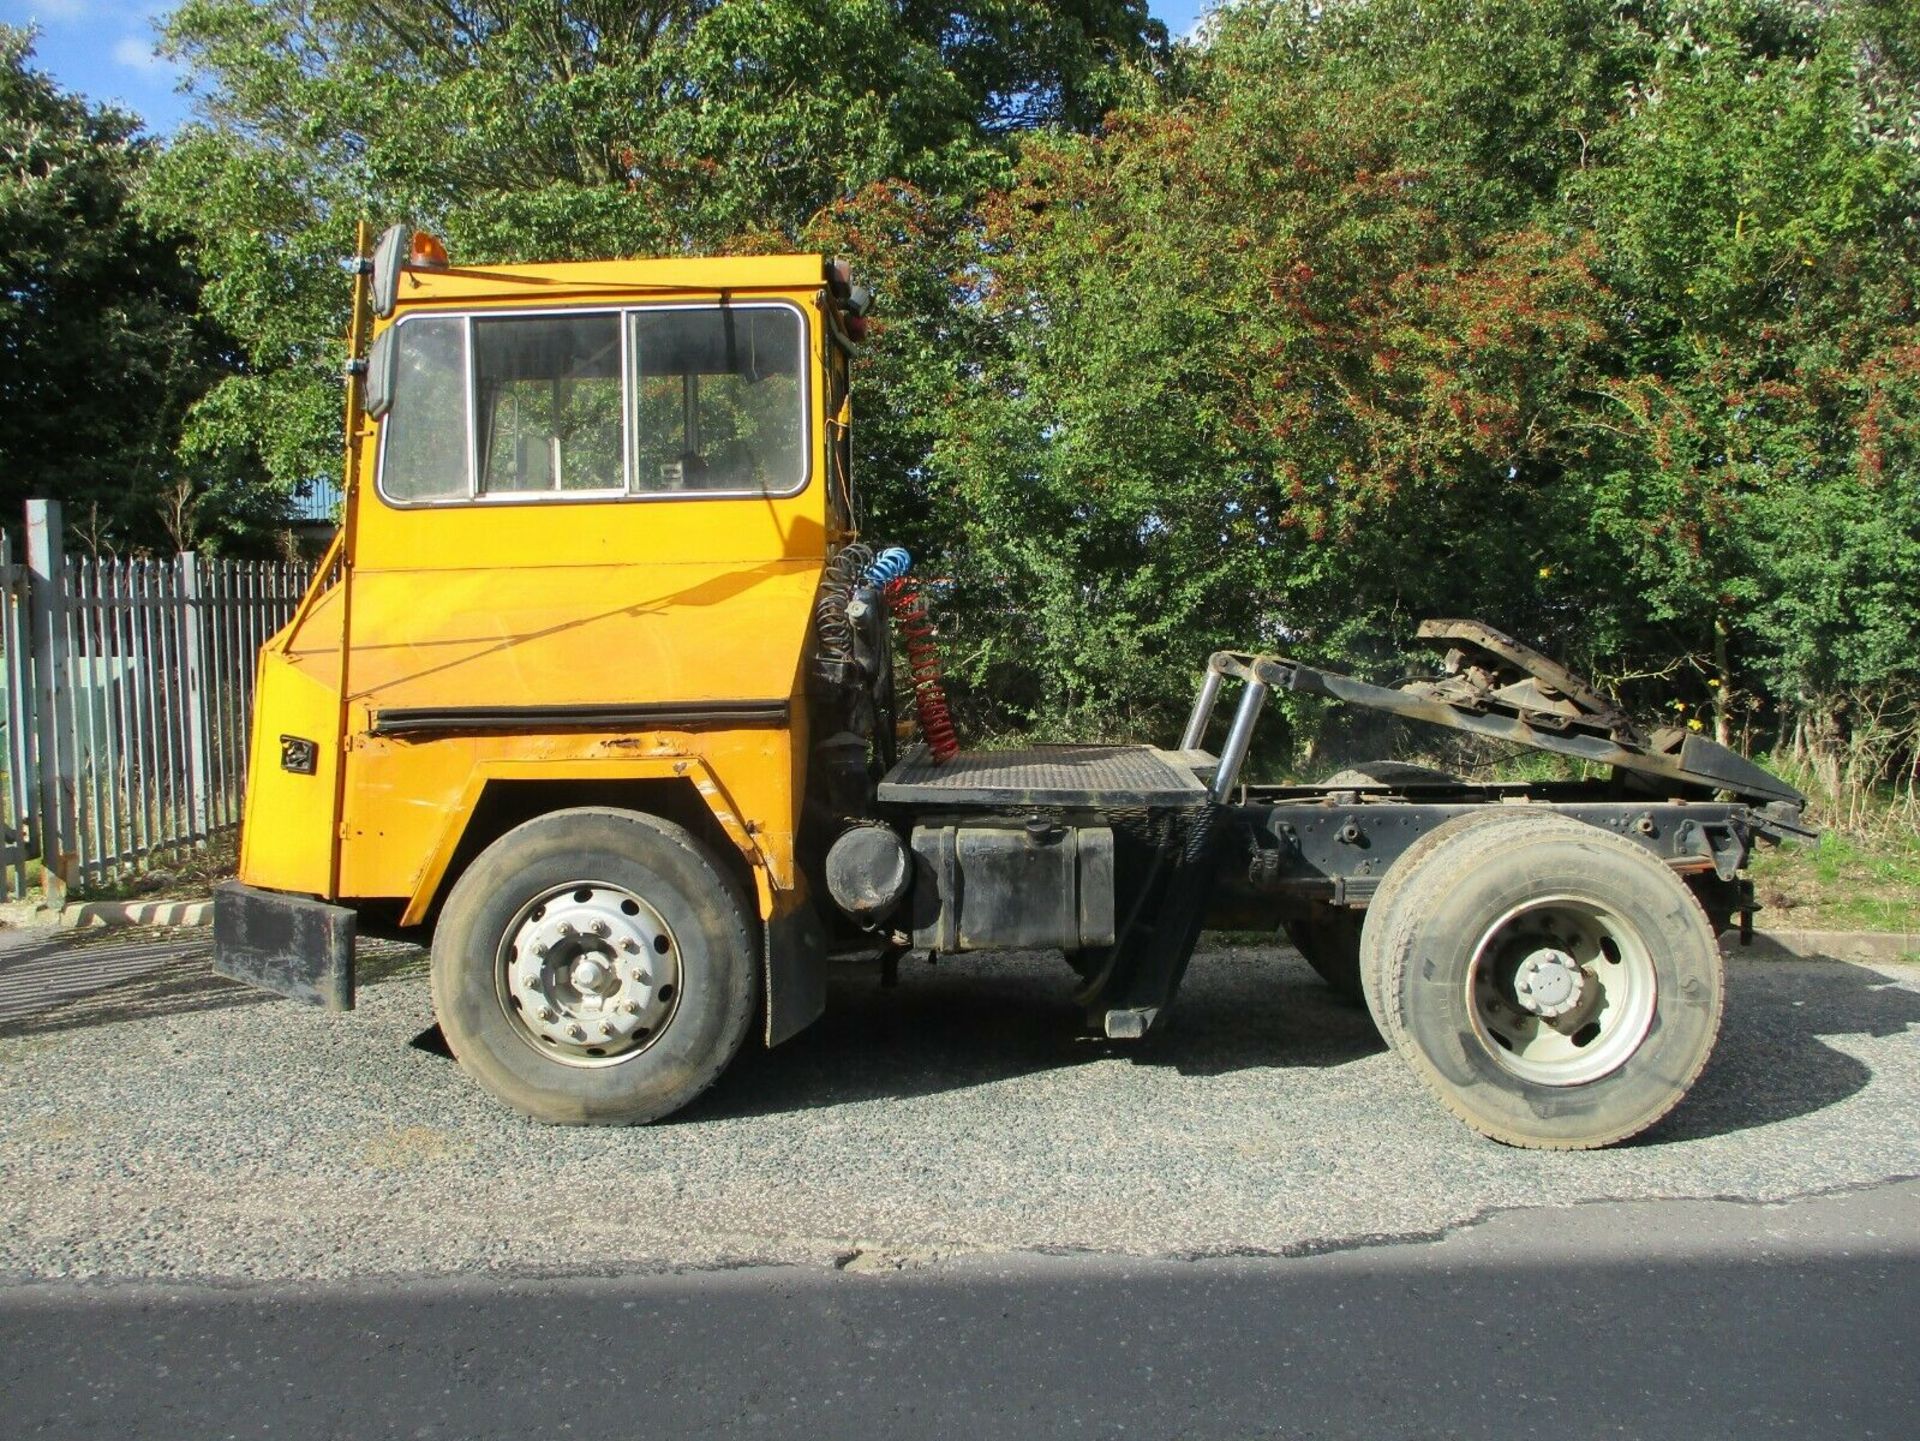 Reliance Dock spotter shunter tow tug tractor unit - Image 2 of 10